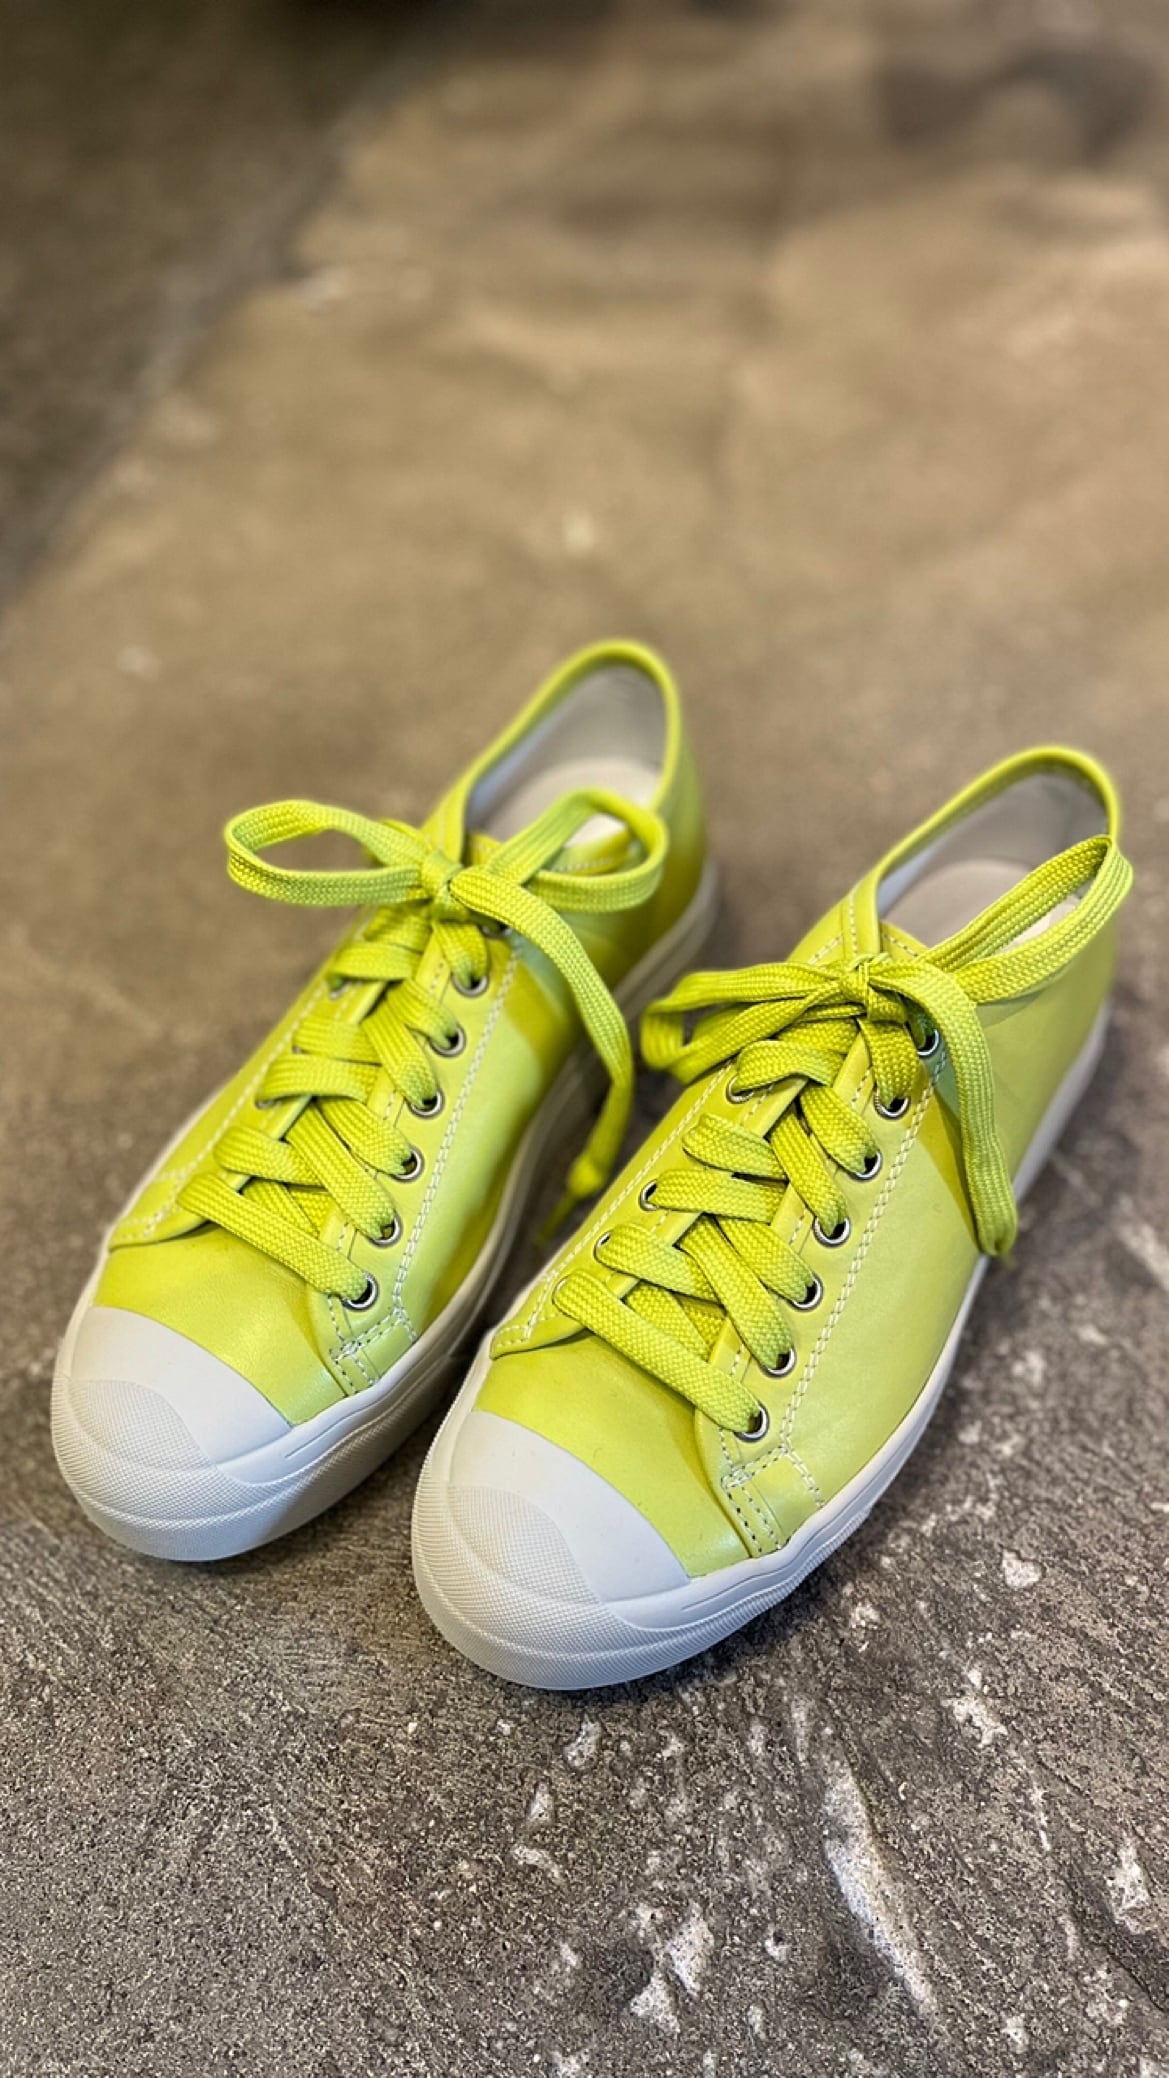 SOFIE D'HOORE-FOLK-: Concealed heel sneakers with rubber cap:ANISE |  biancabrillante